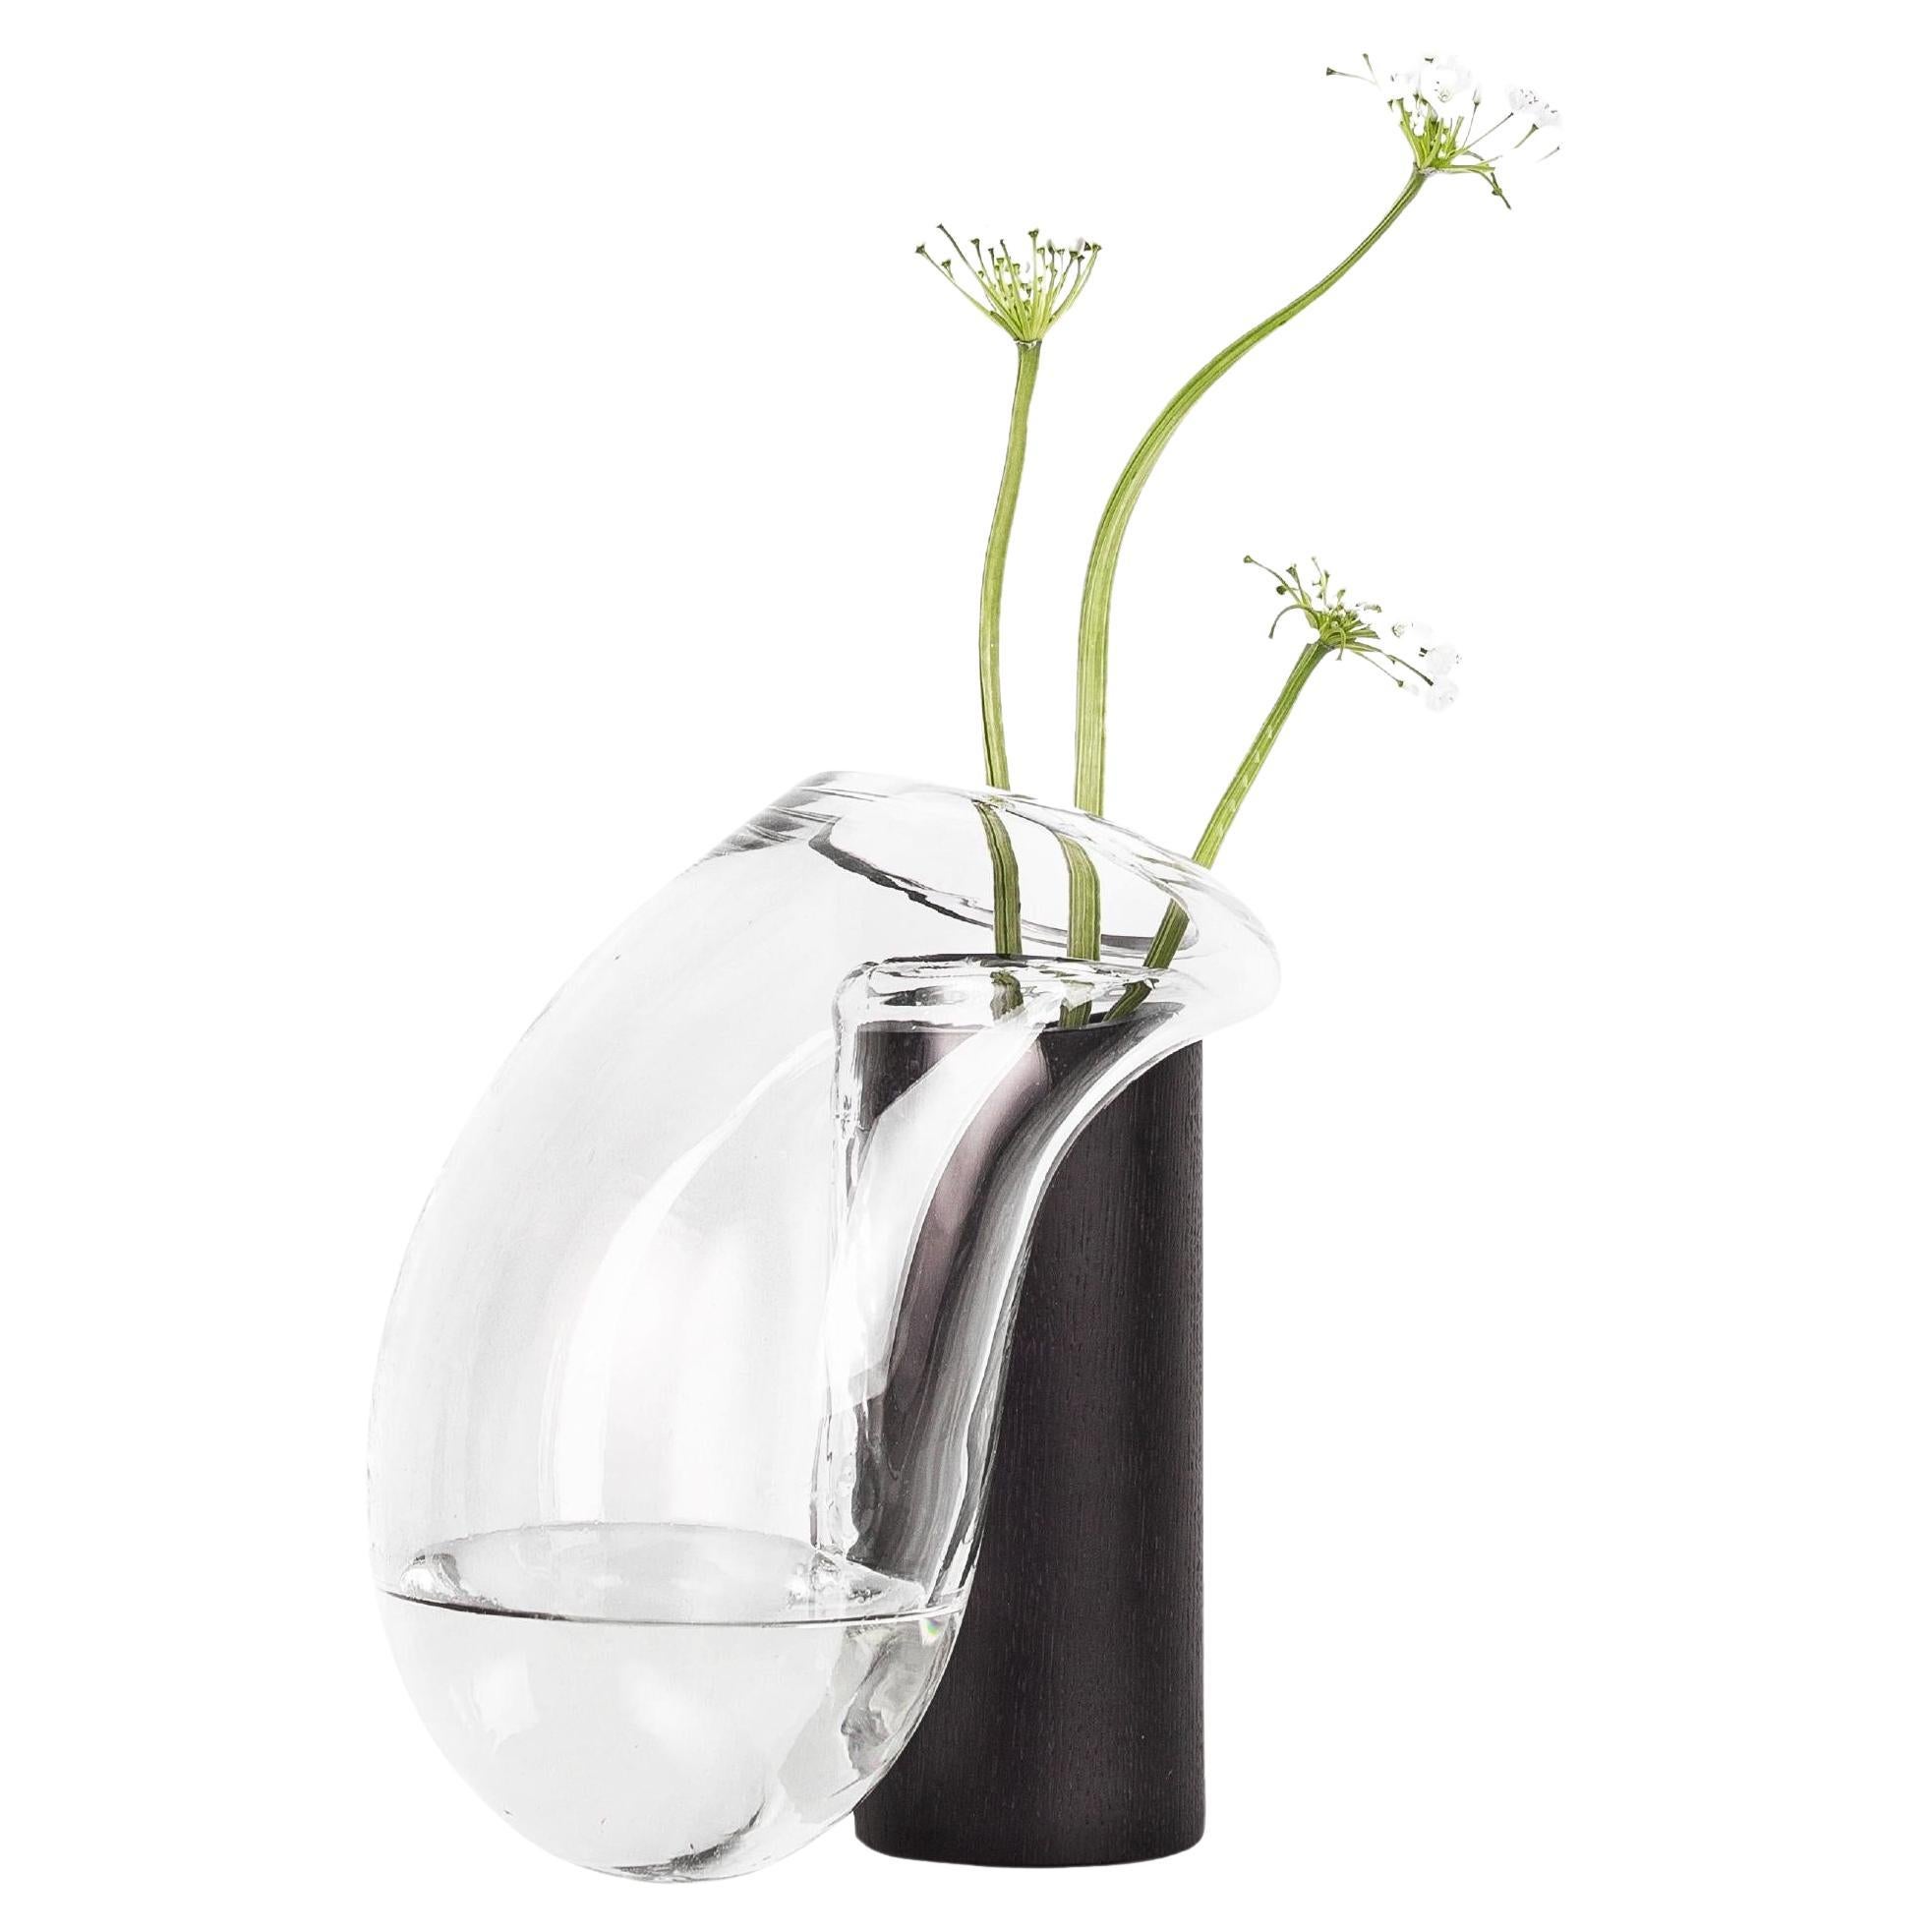 Contemporary Vase 'Gutta Boon CS1' by Noom, Large, Blown Glass and Oak Base For Sale